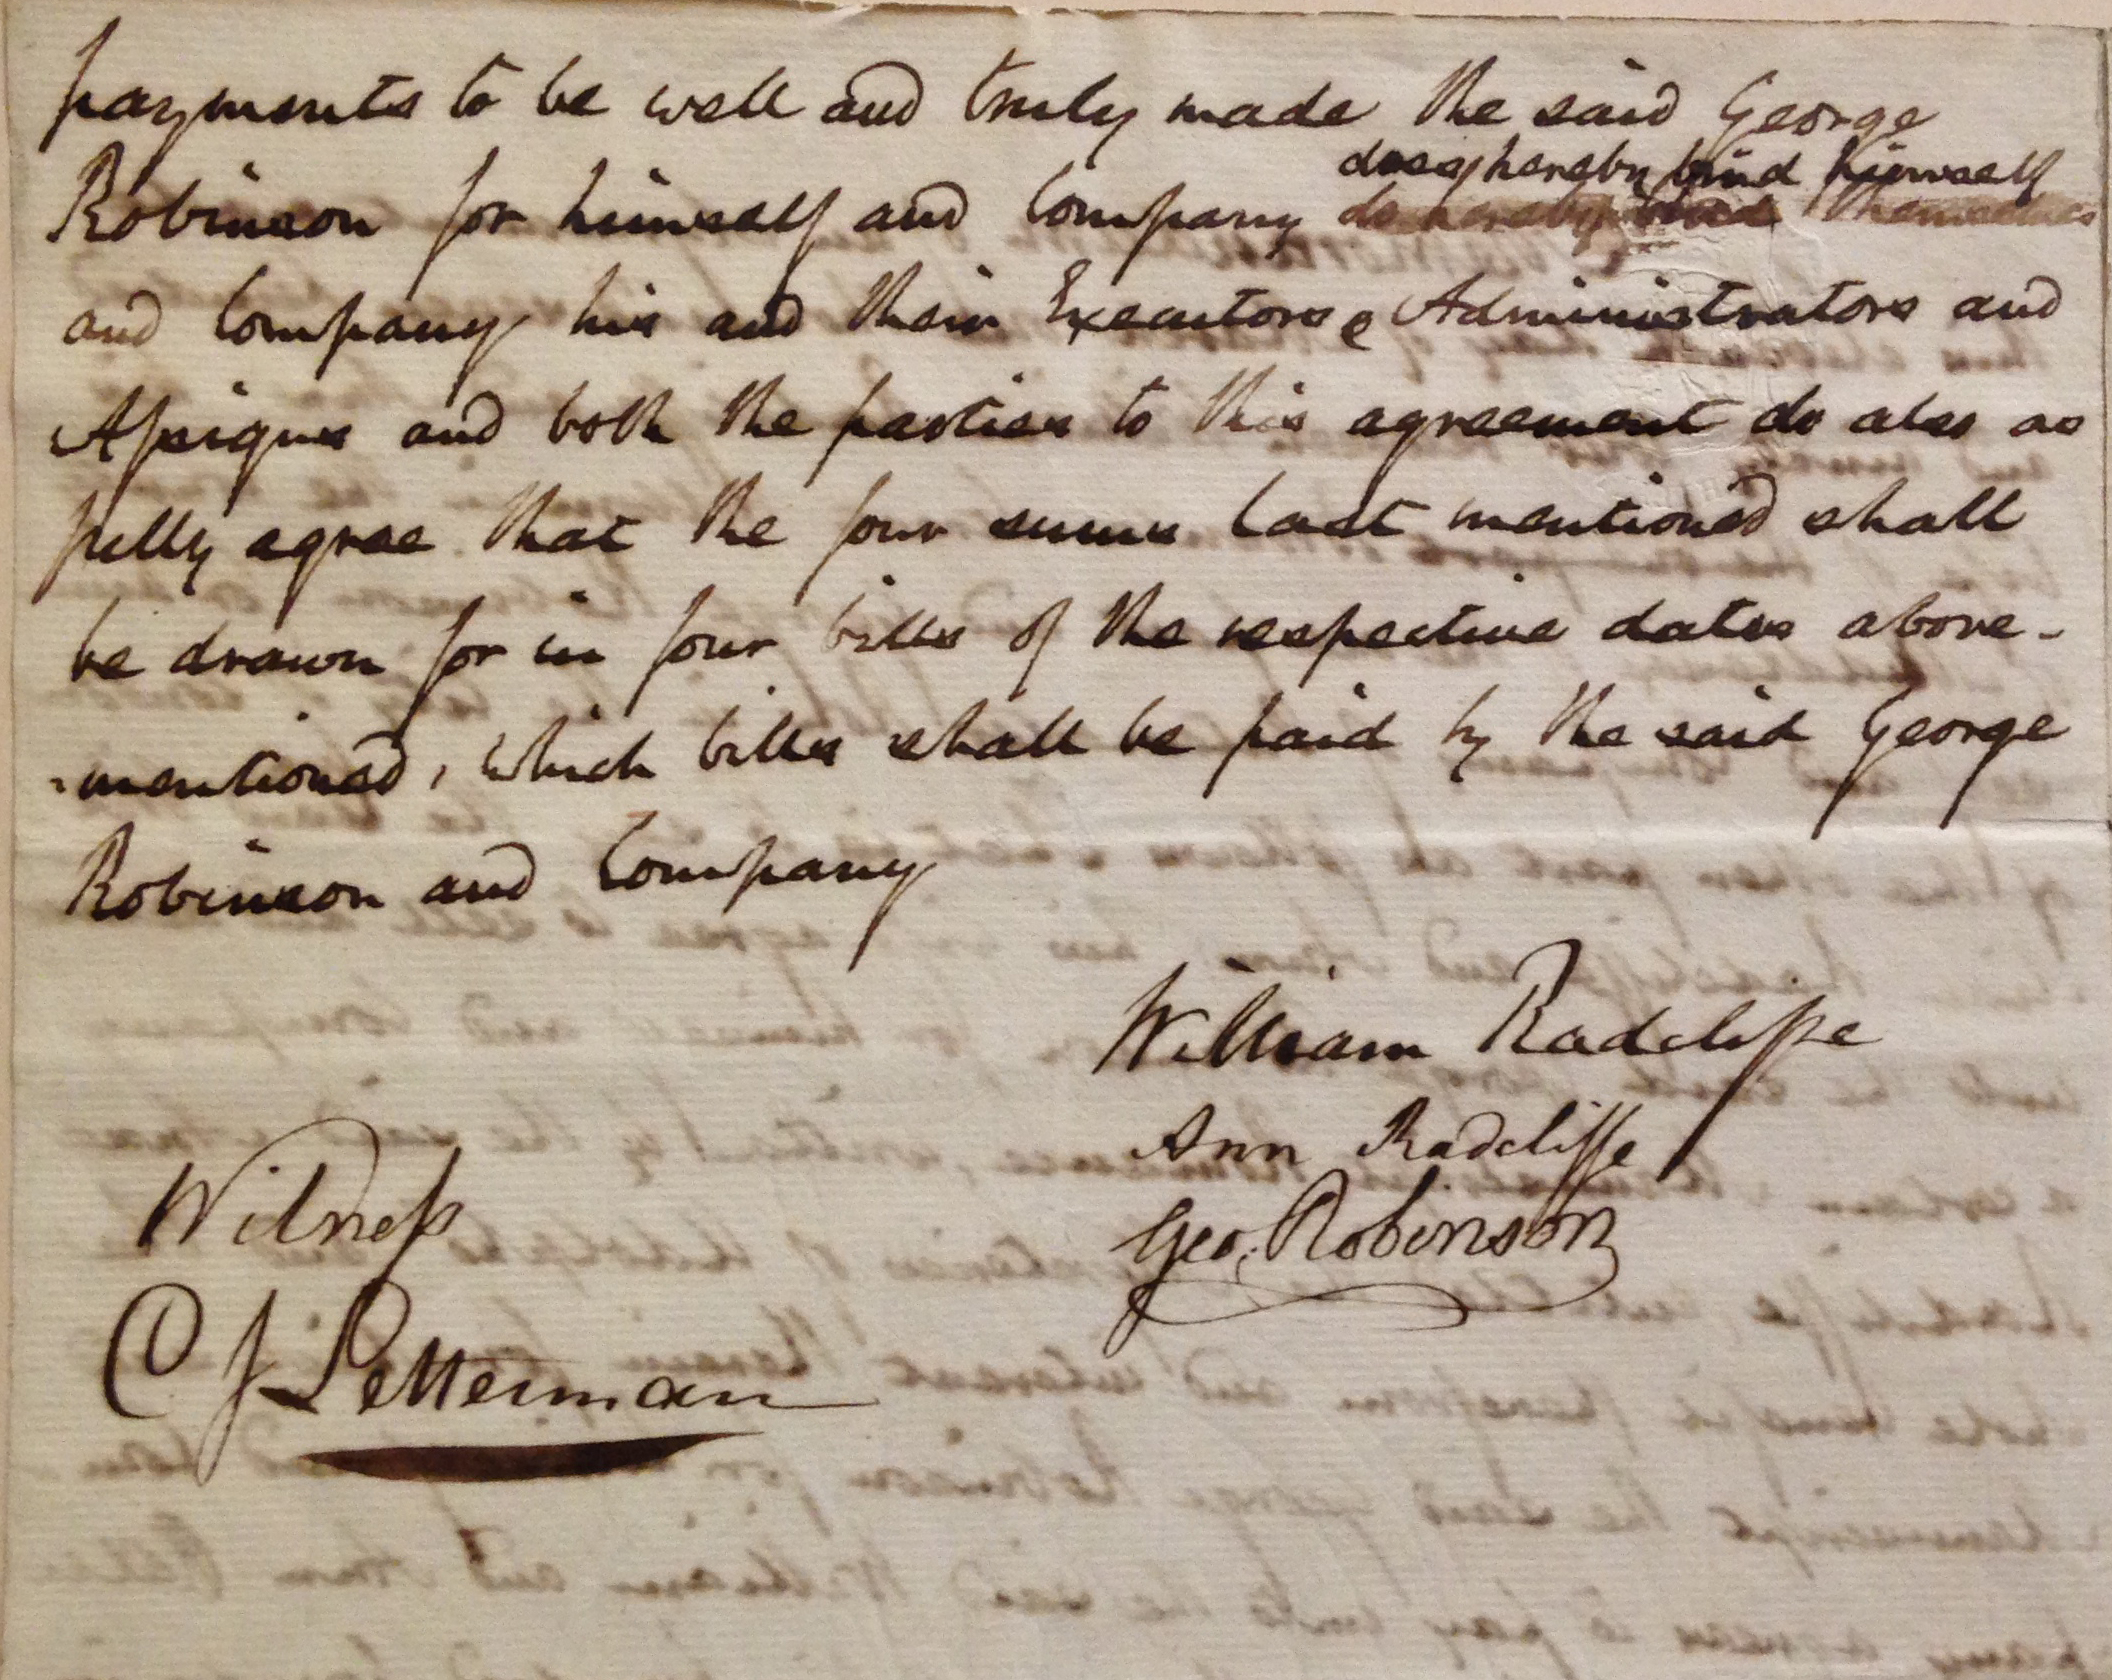 Original manuscript contract, signed by Ann Radcliffe, for her bestselling the Mysteries of Udolpho (London: G.G. and J. Robinson, 1794). Radcliffe's novel commanded the princely sum of 500 British pounds from publisher George Robinson. (MSS 1625)